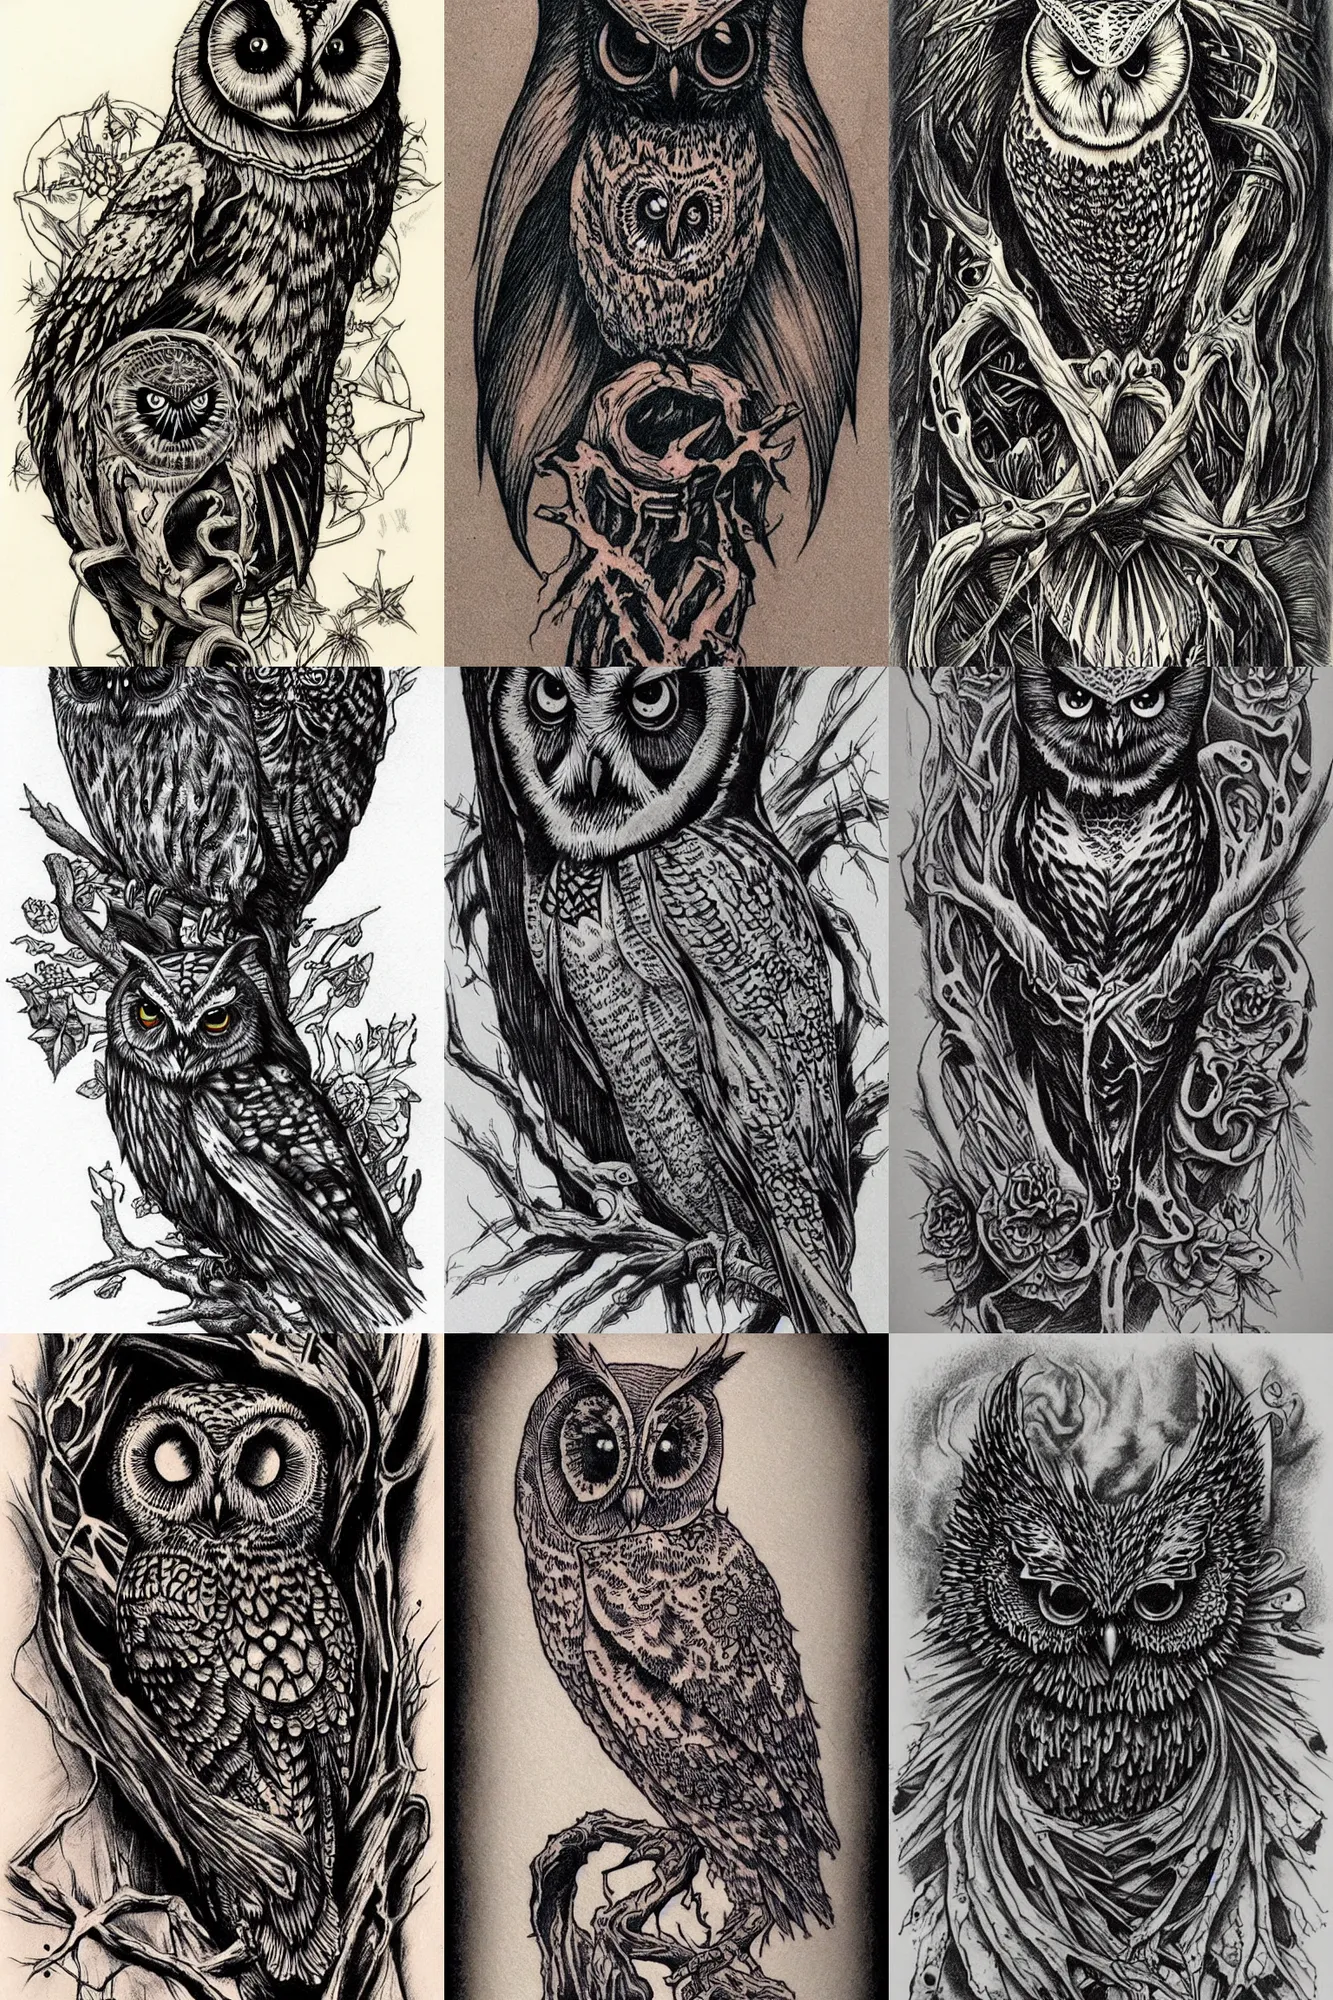 Prompt: gothic tattoo design of an Owl by bernie wrightson